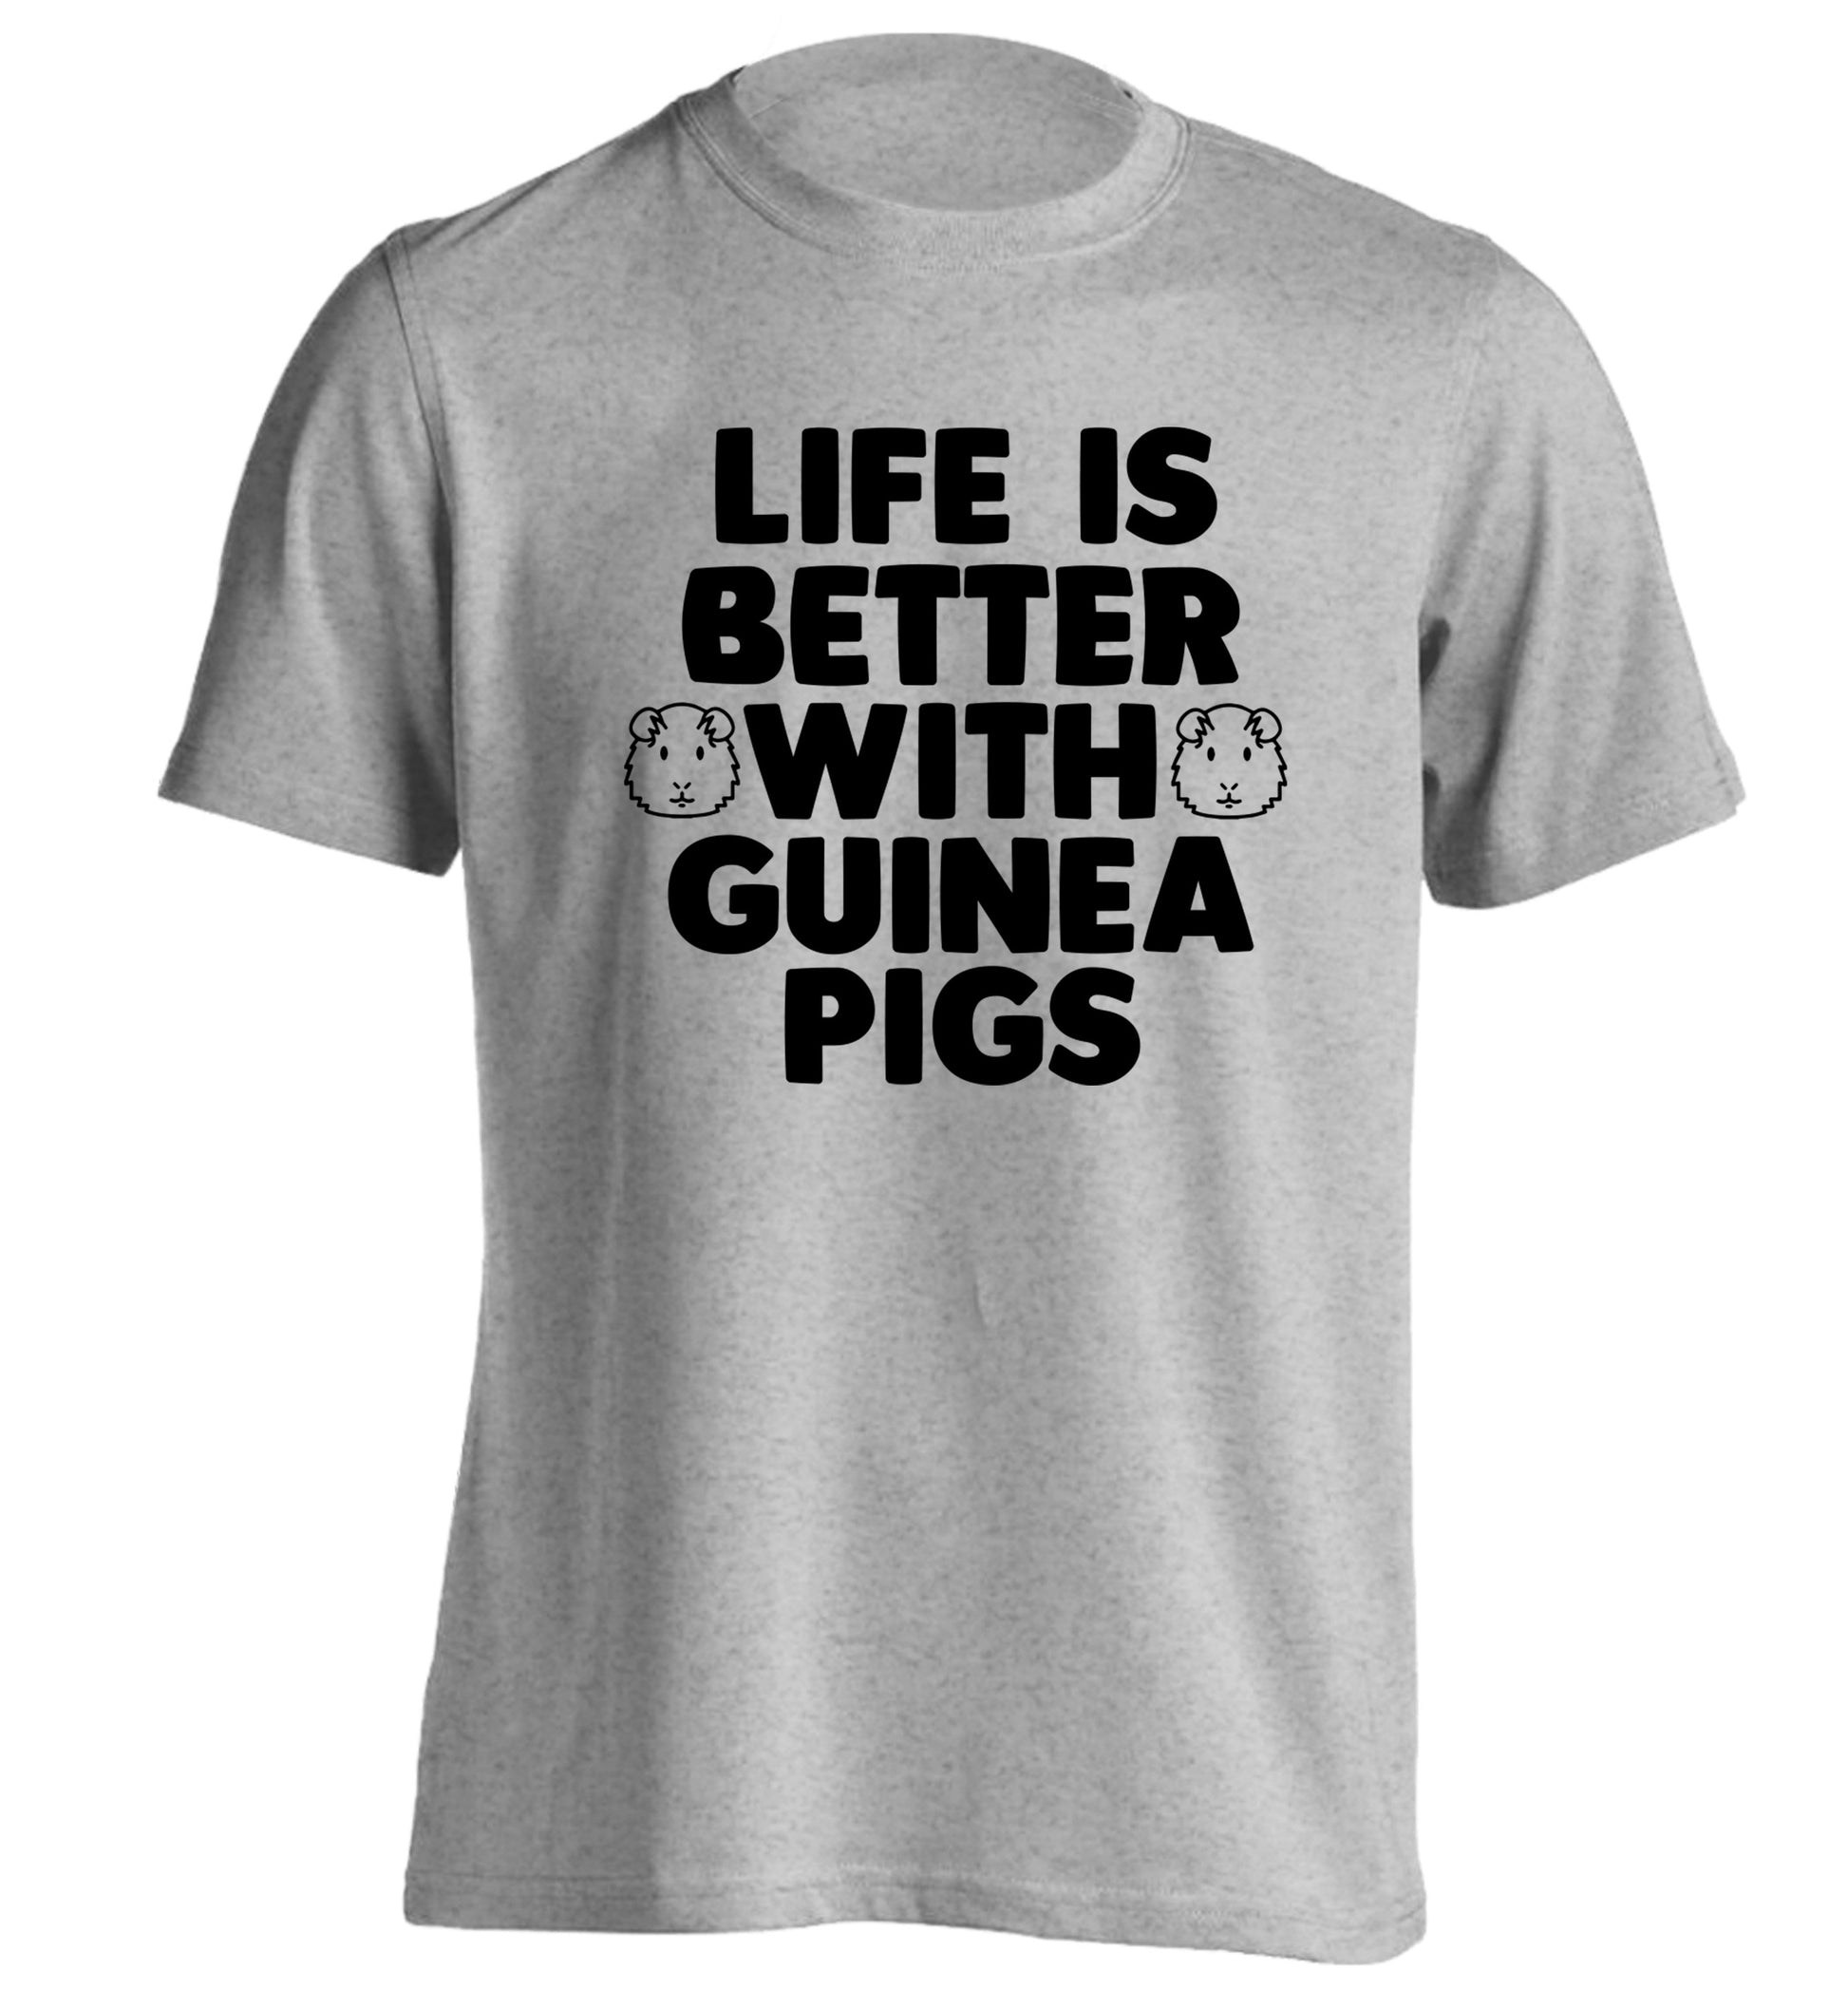 Life is better with guinea pigs adults unisex grey Tshirt 2XL